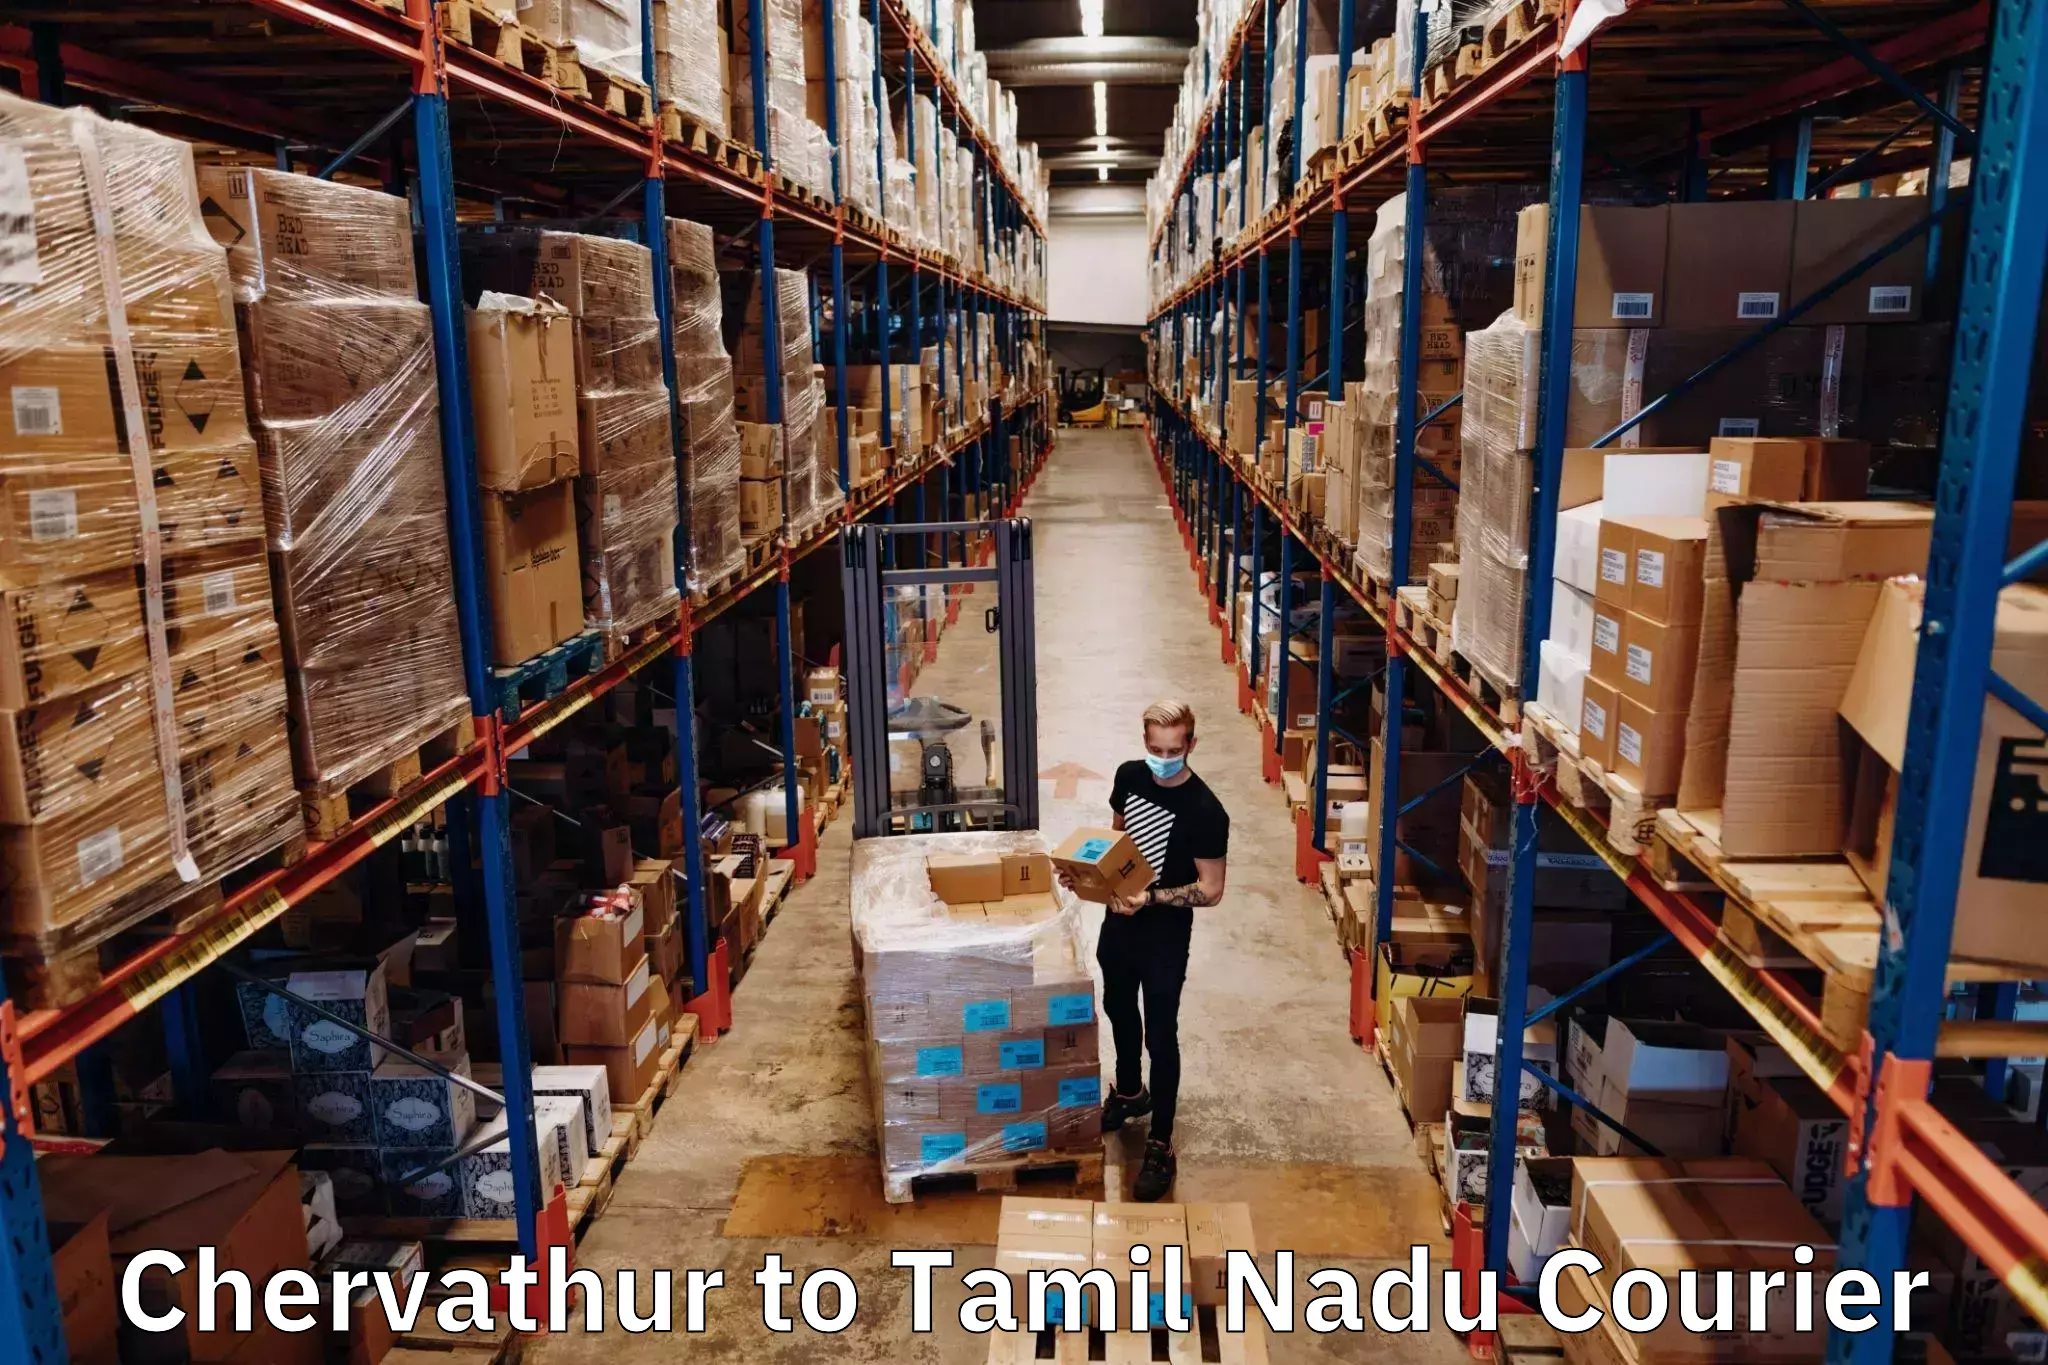 Subscription-based courier Chervathur to Tuticorin Port